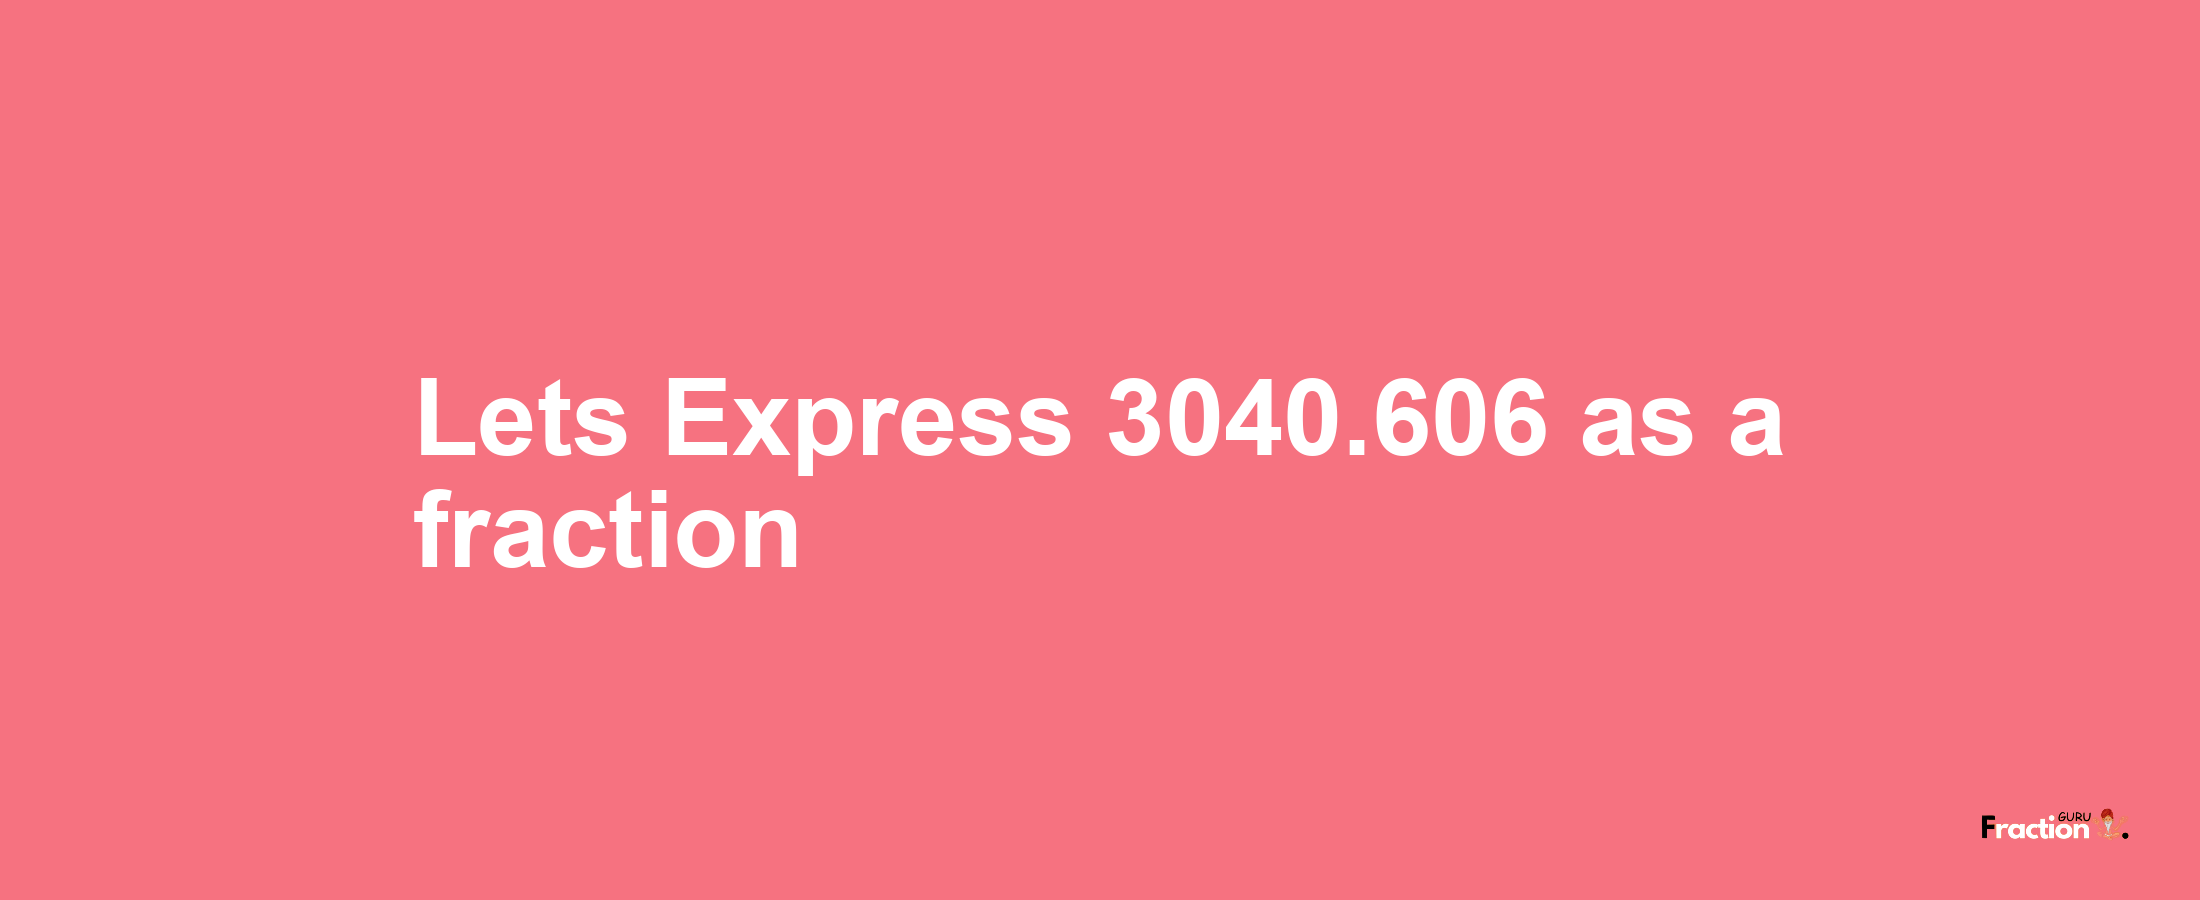 Lets Express 3040.606 as afraction